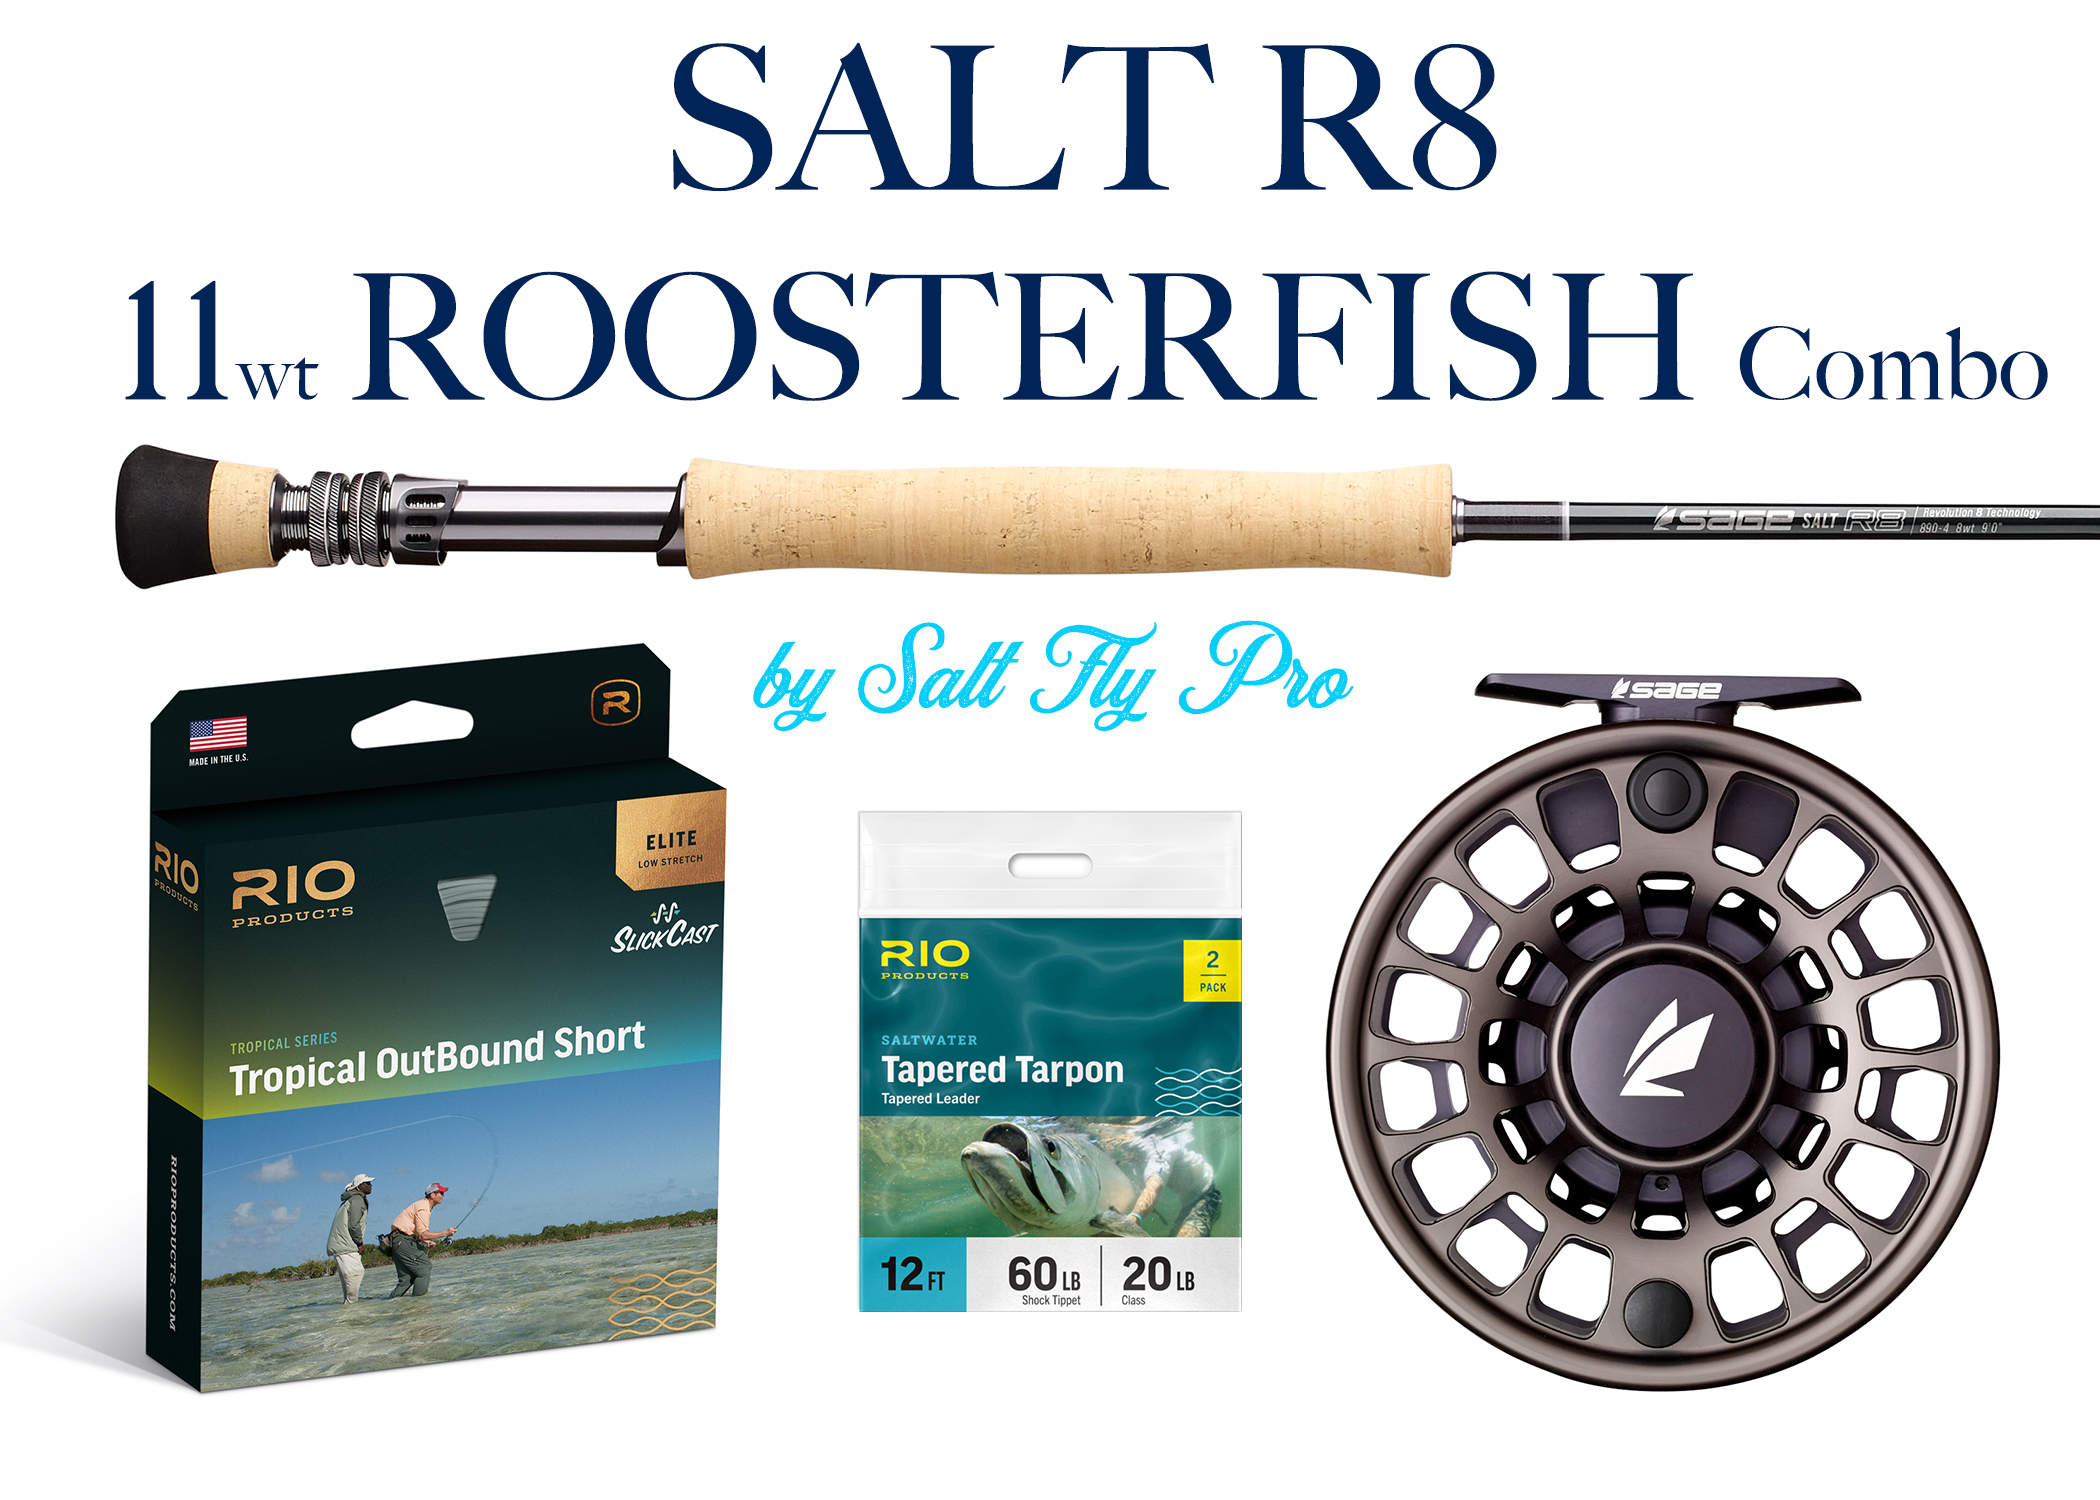 Sage SALT R8 11wt ROOSTERFISH Fly Rod Combo Outfit - NEW!